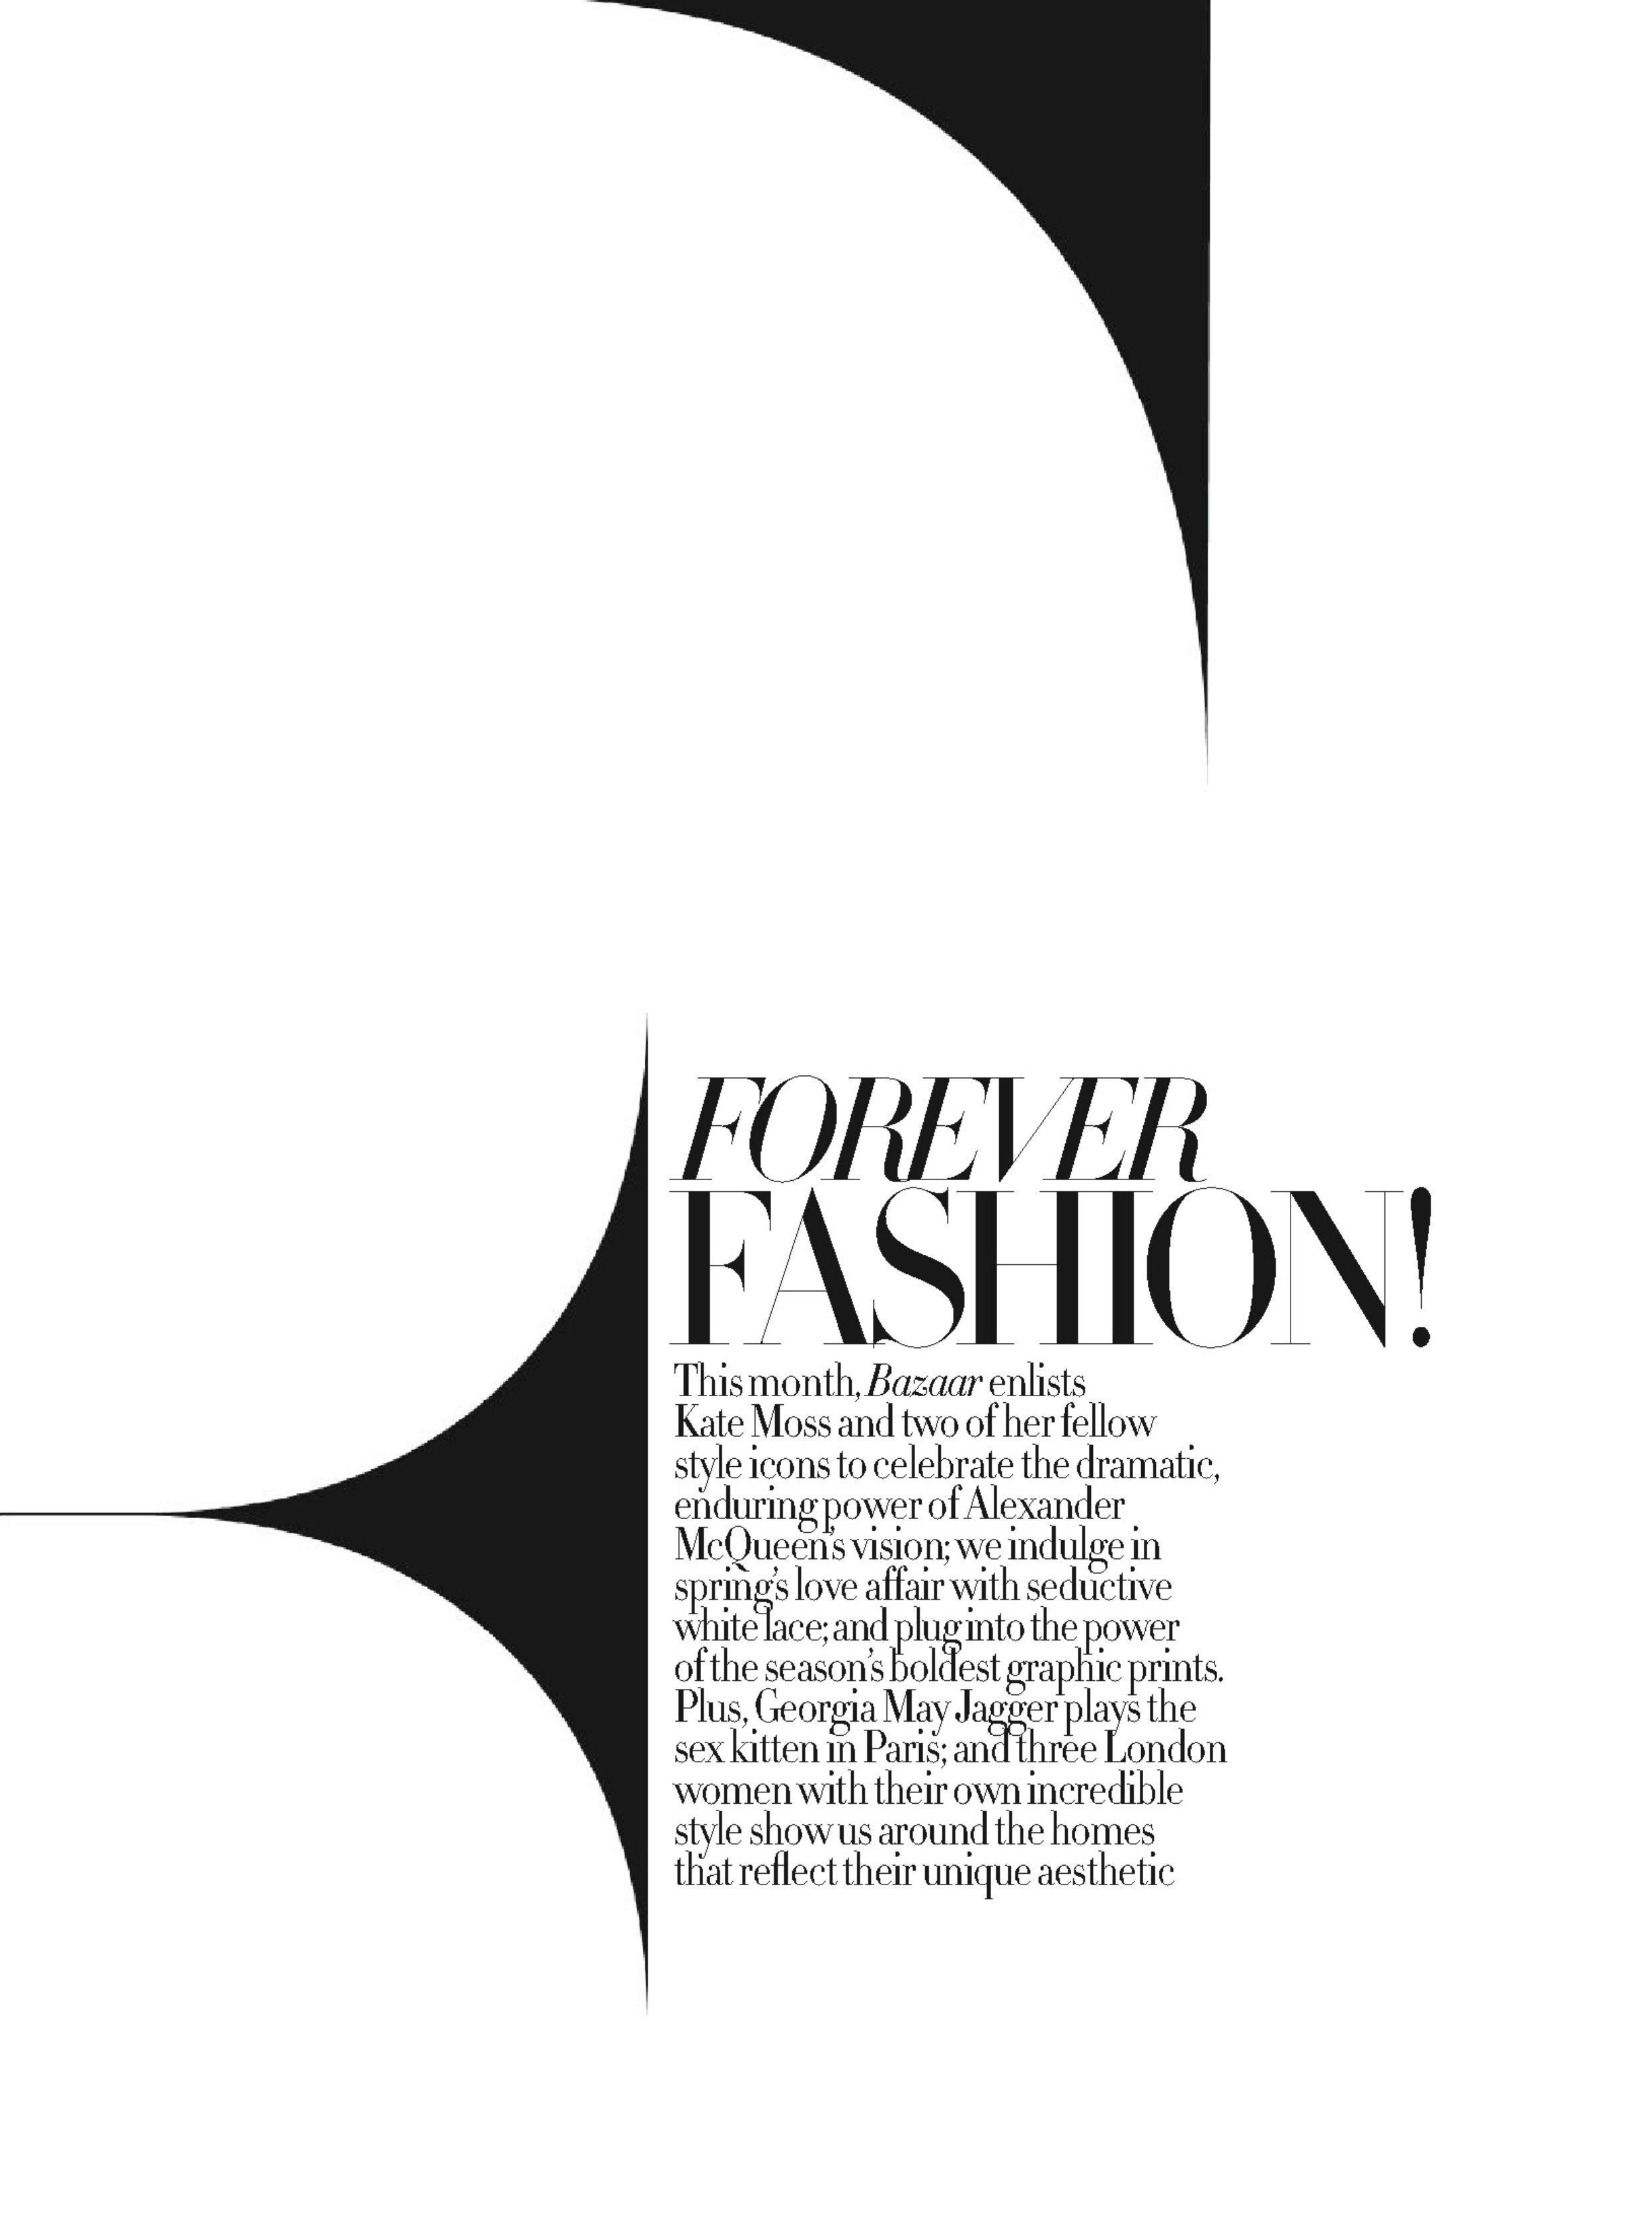 French Magazine Logo - French Vogue - Fabien Baron. Like the playing with the typo ...